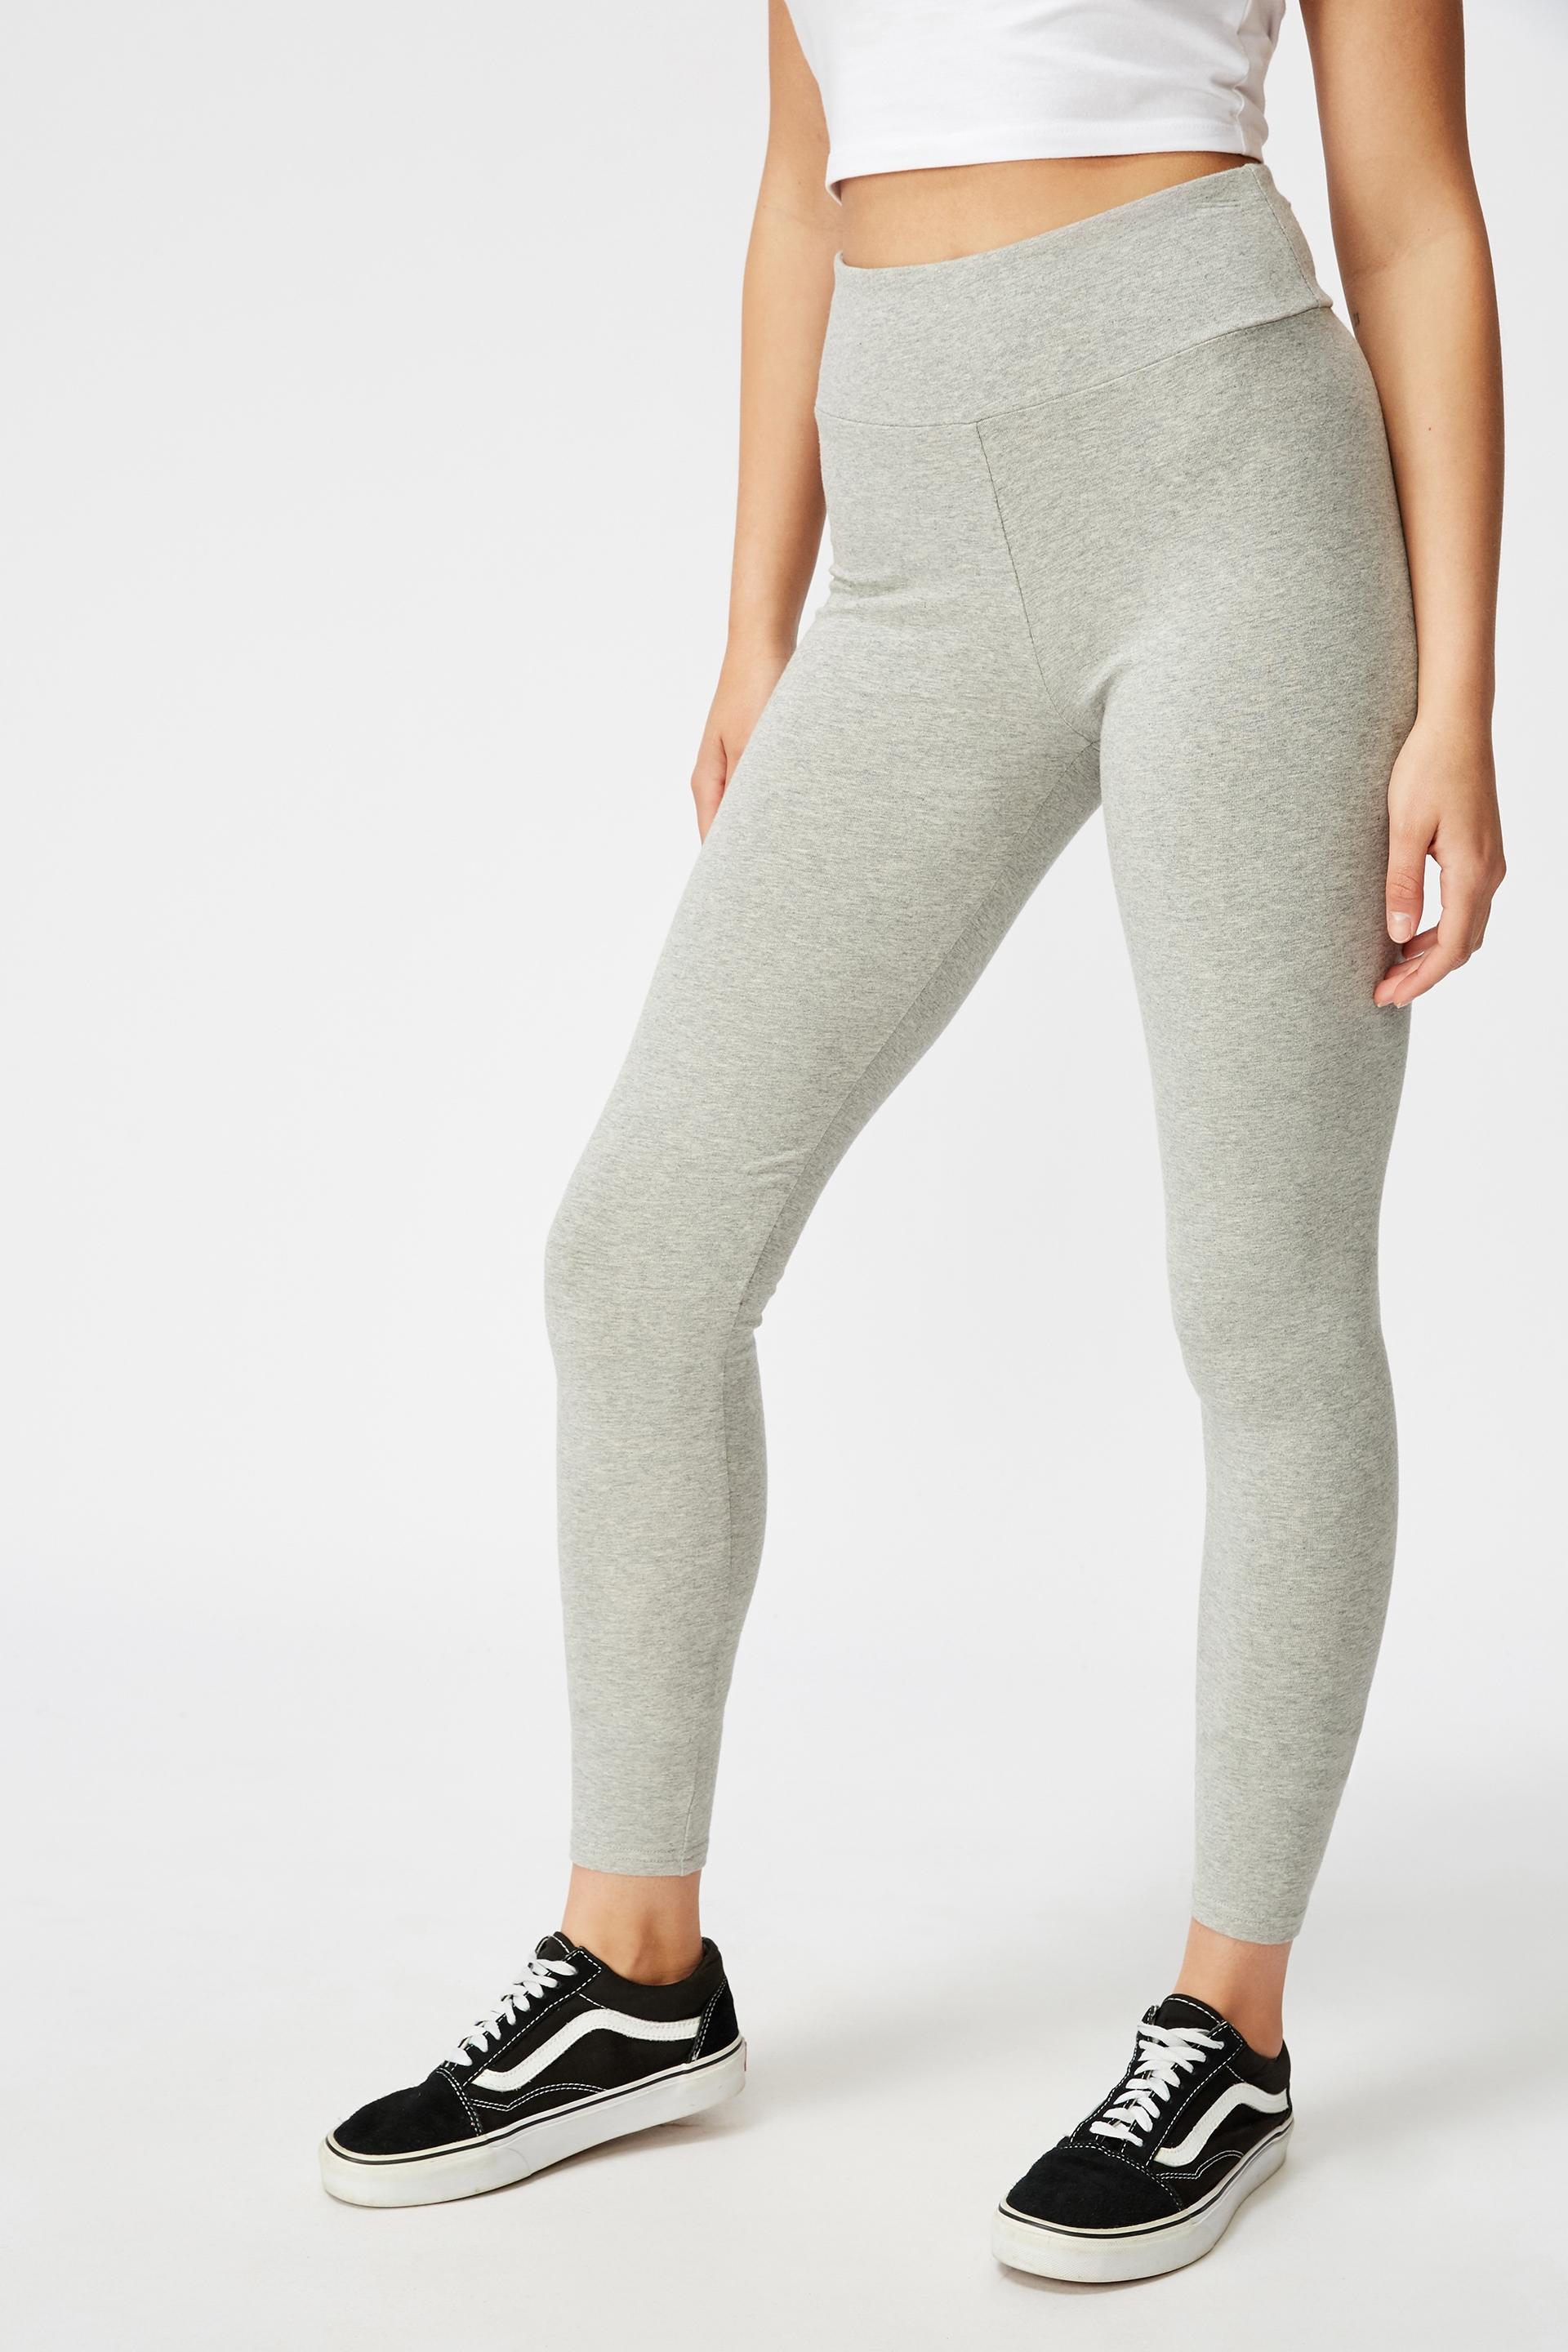 High waisted legging - grey marle Cotton On Trousers | Superbalist.com